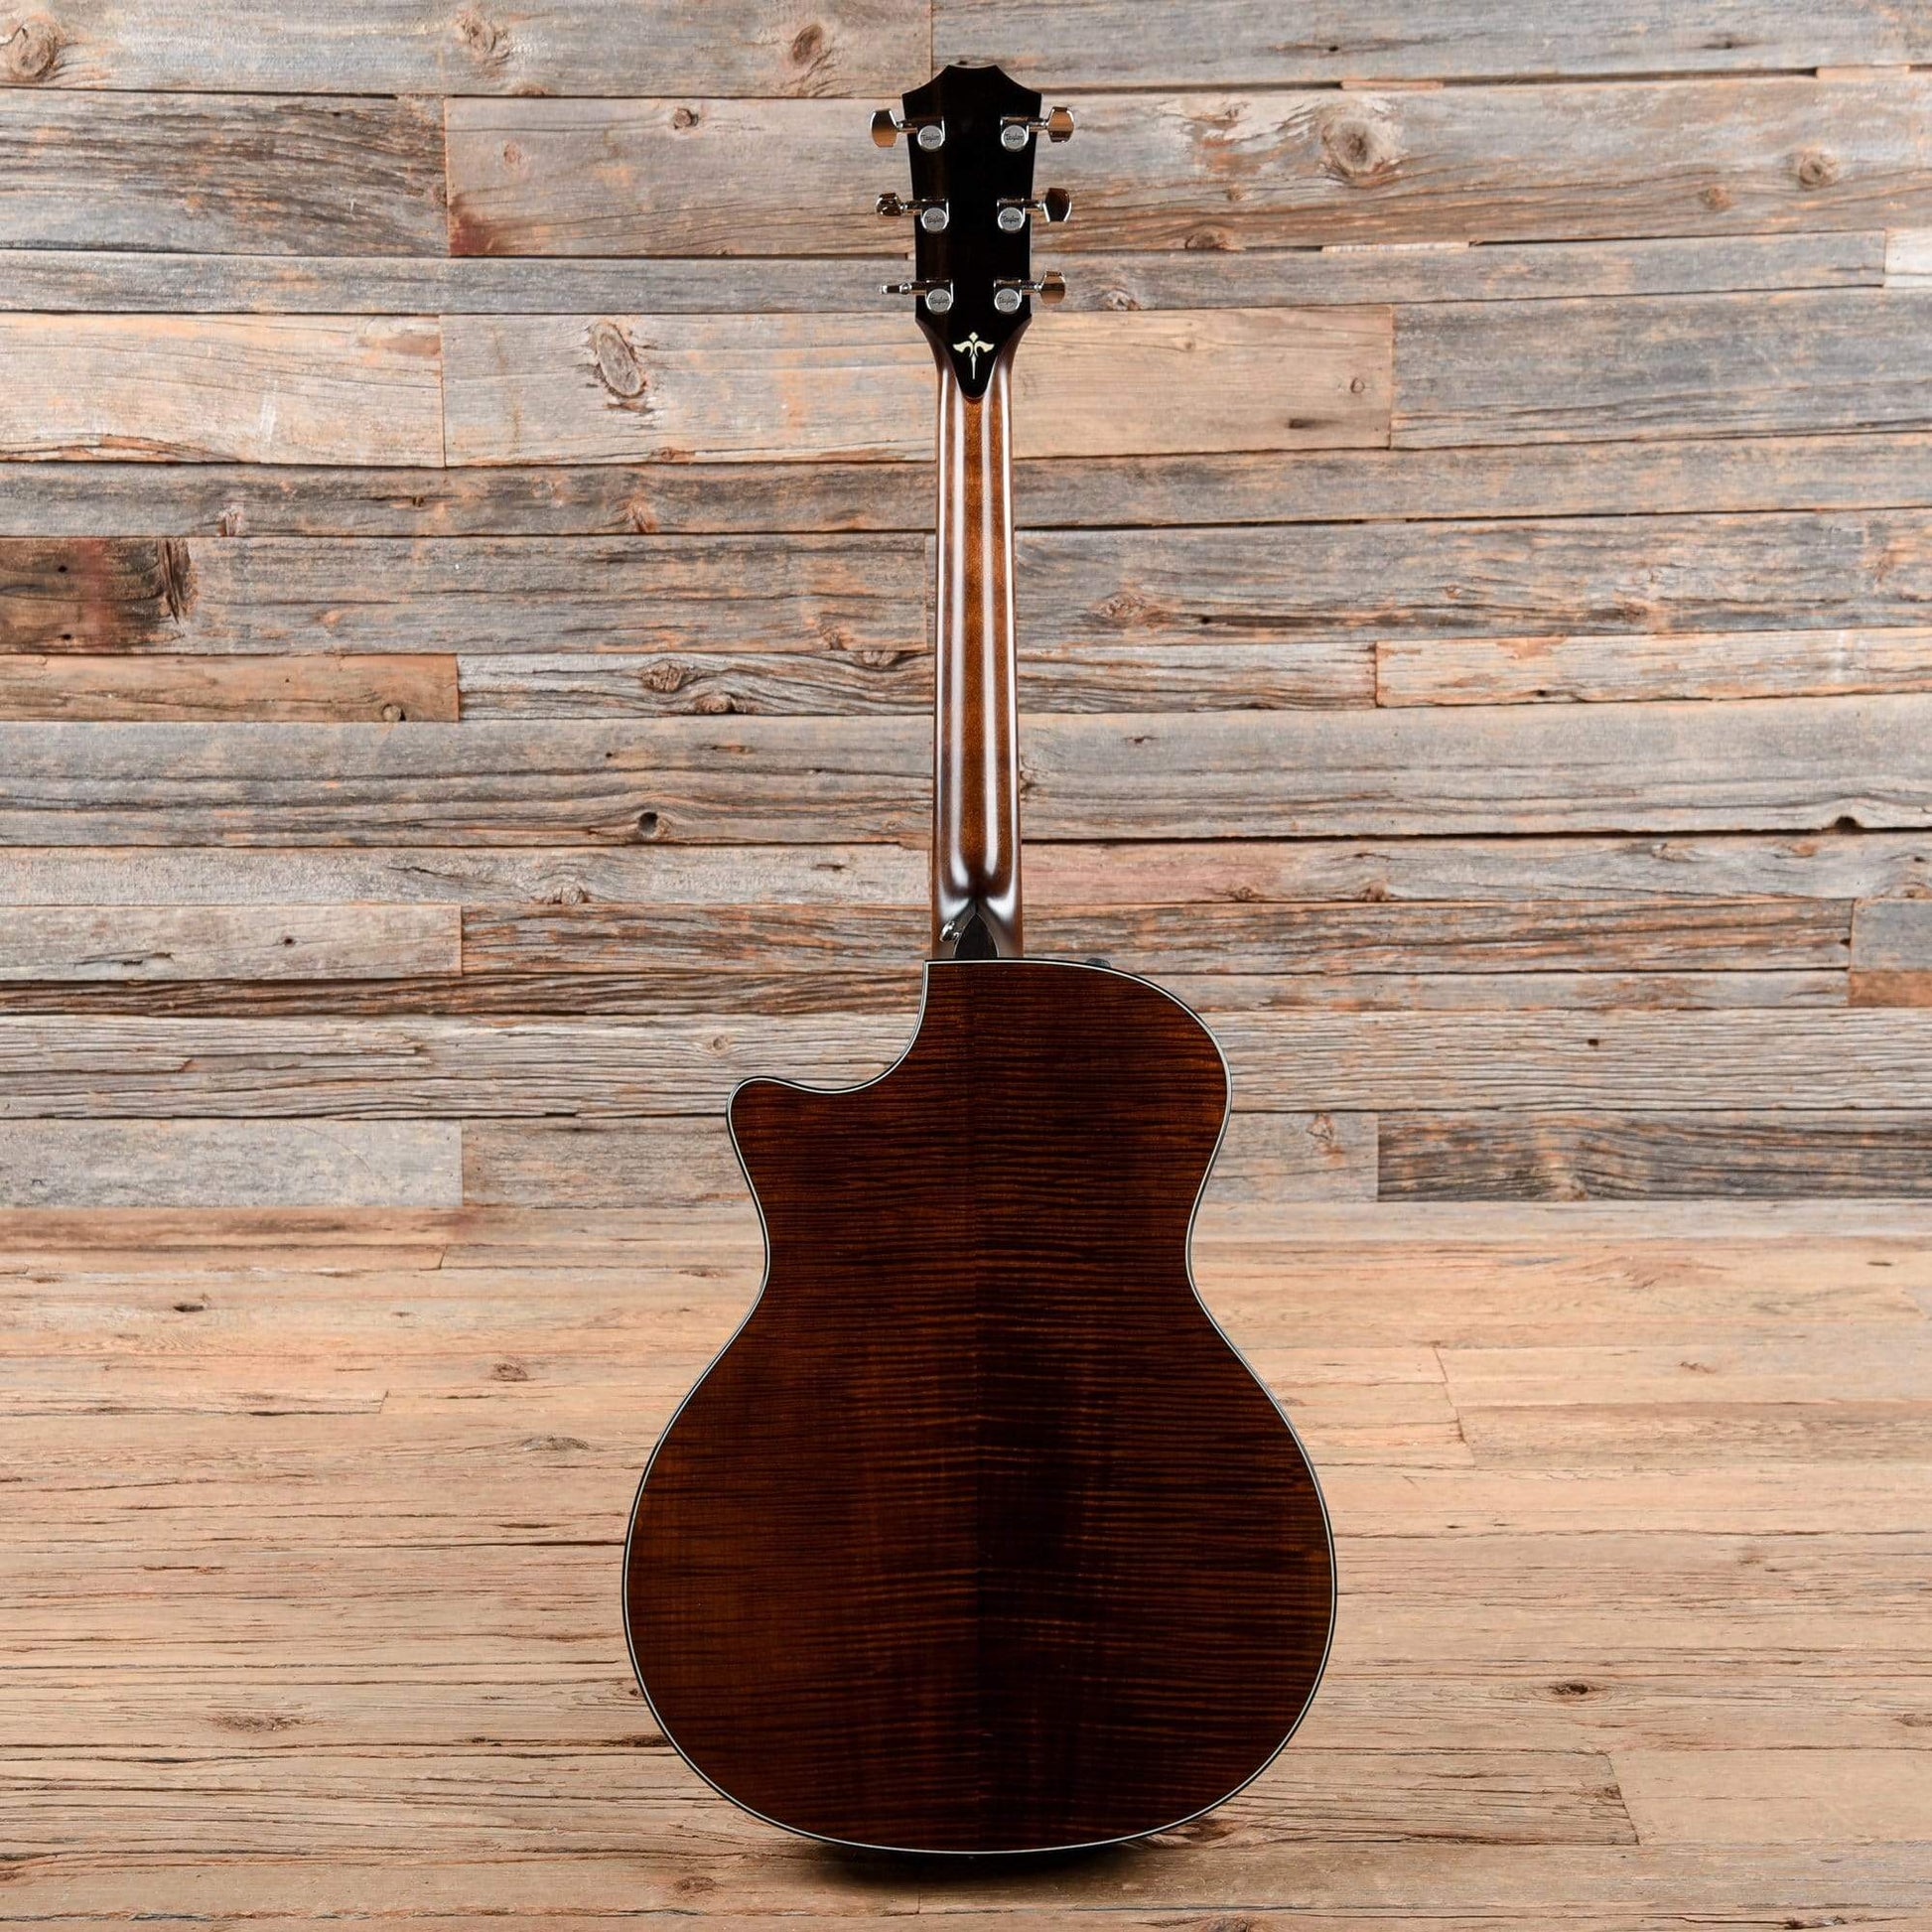 Taylor 614ce V-Class Natural 2018 Acoustic Guitars / Built-in Electronics,Acoustic Guitars / OM and Auditorium